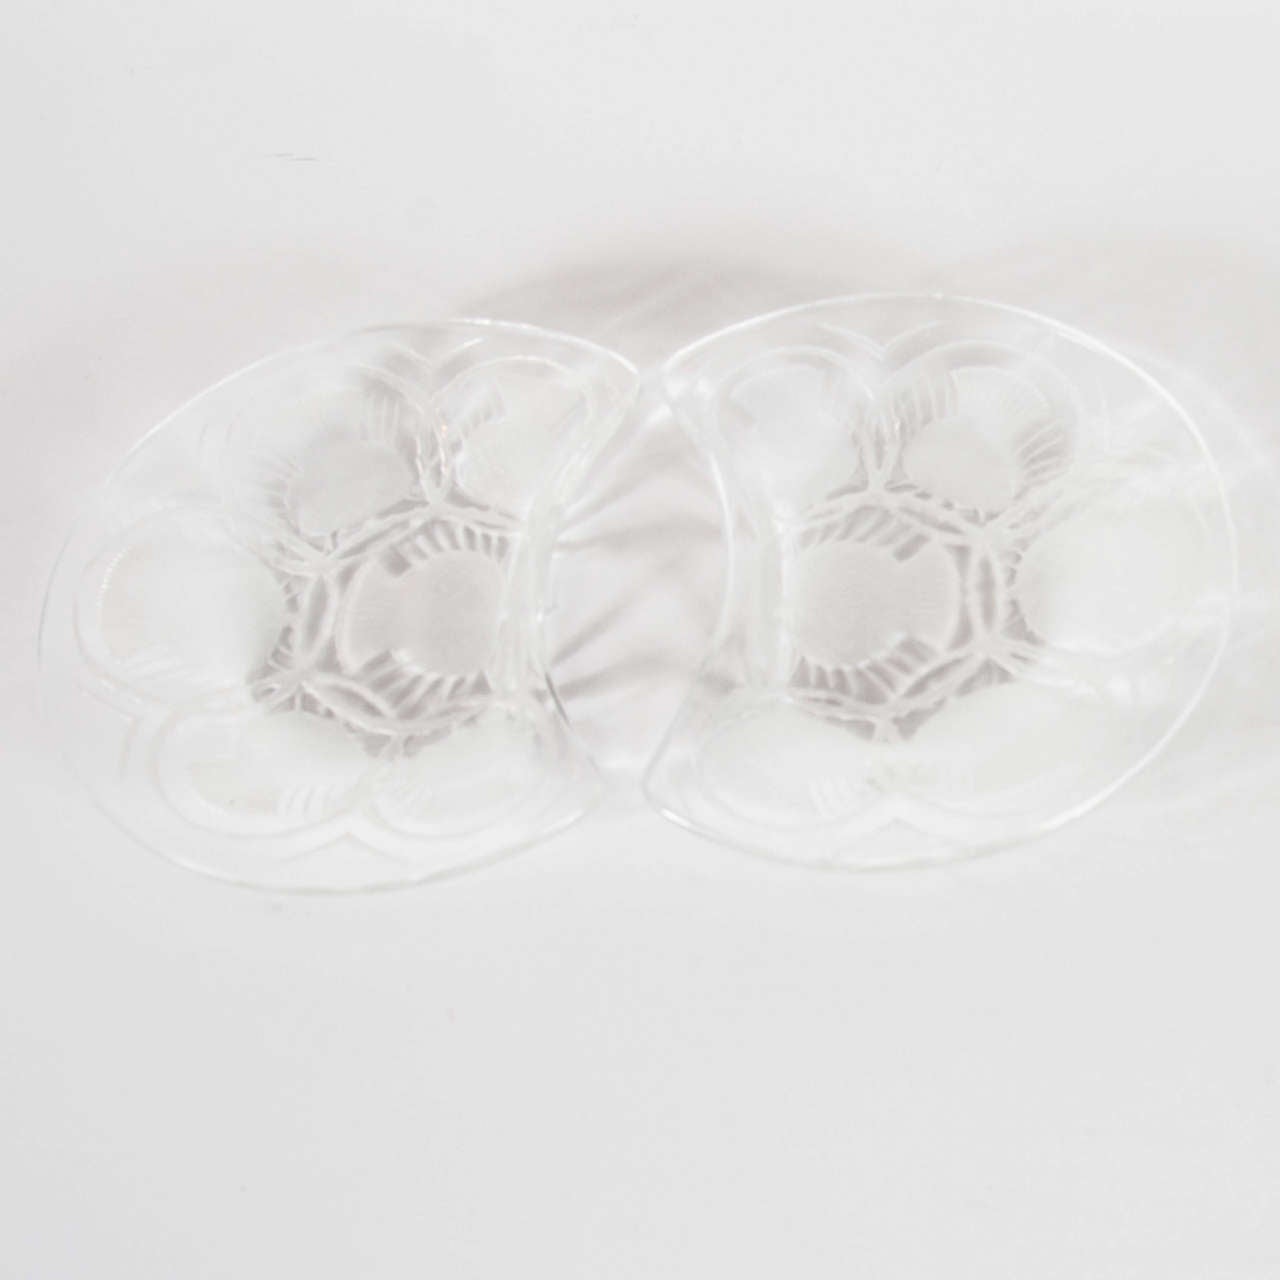 This pair of stunning Lalique plates bear a reverse etched stylized Art Deco pineapple motif with geometric detailing . It bears the Lalique signature on the bottom of each.